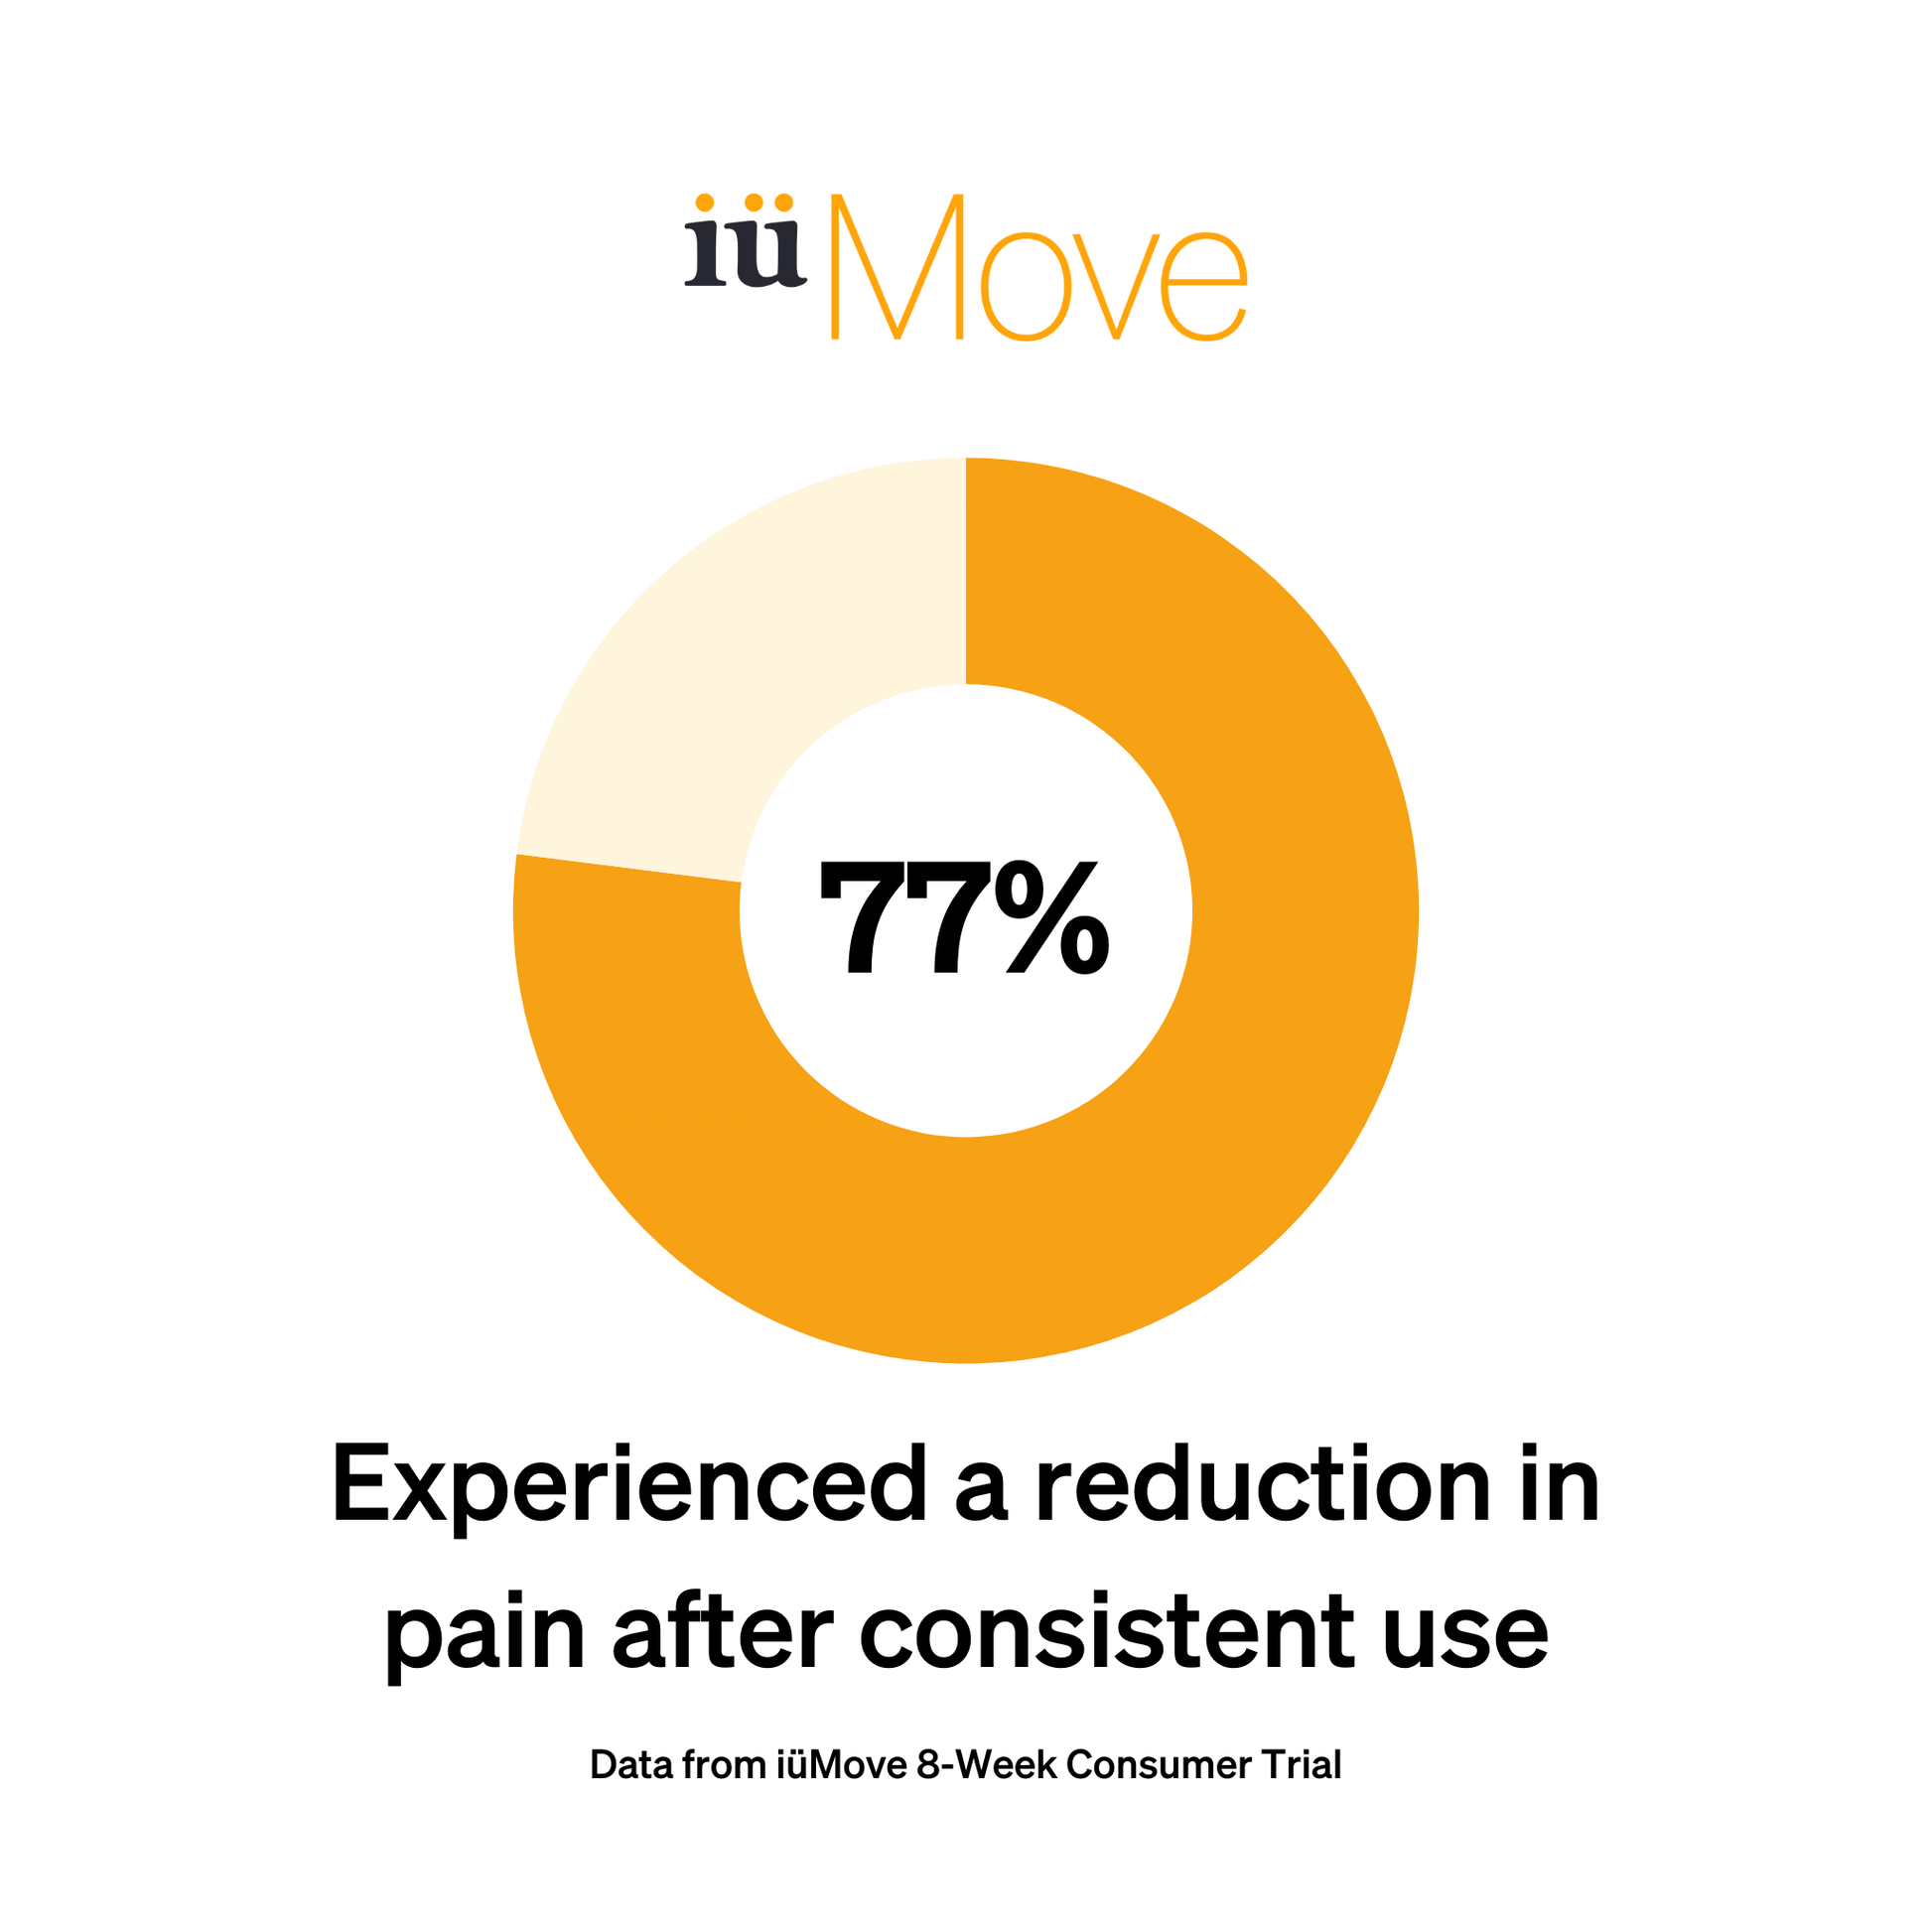 77% of people experienced a reduction in pain after consistent use of iüMove joint health supplement